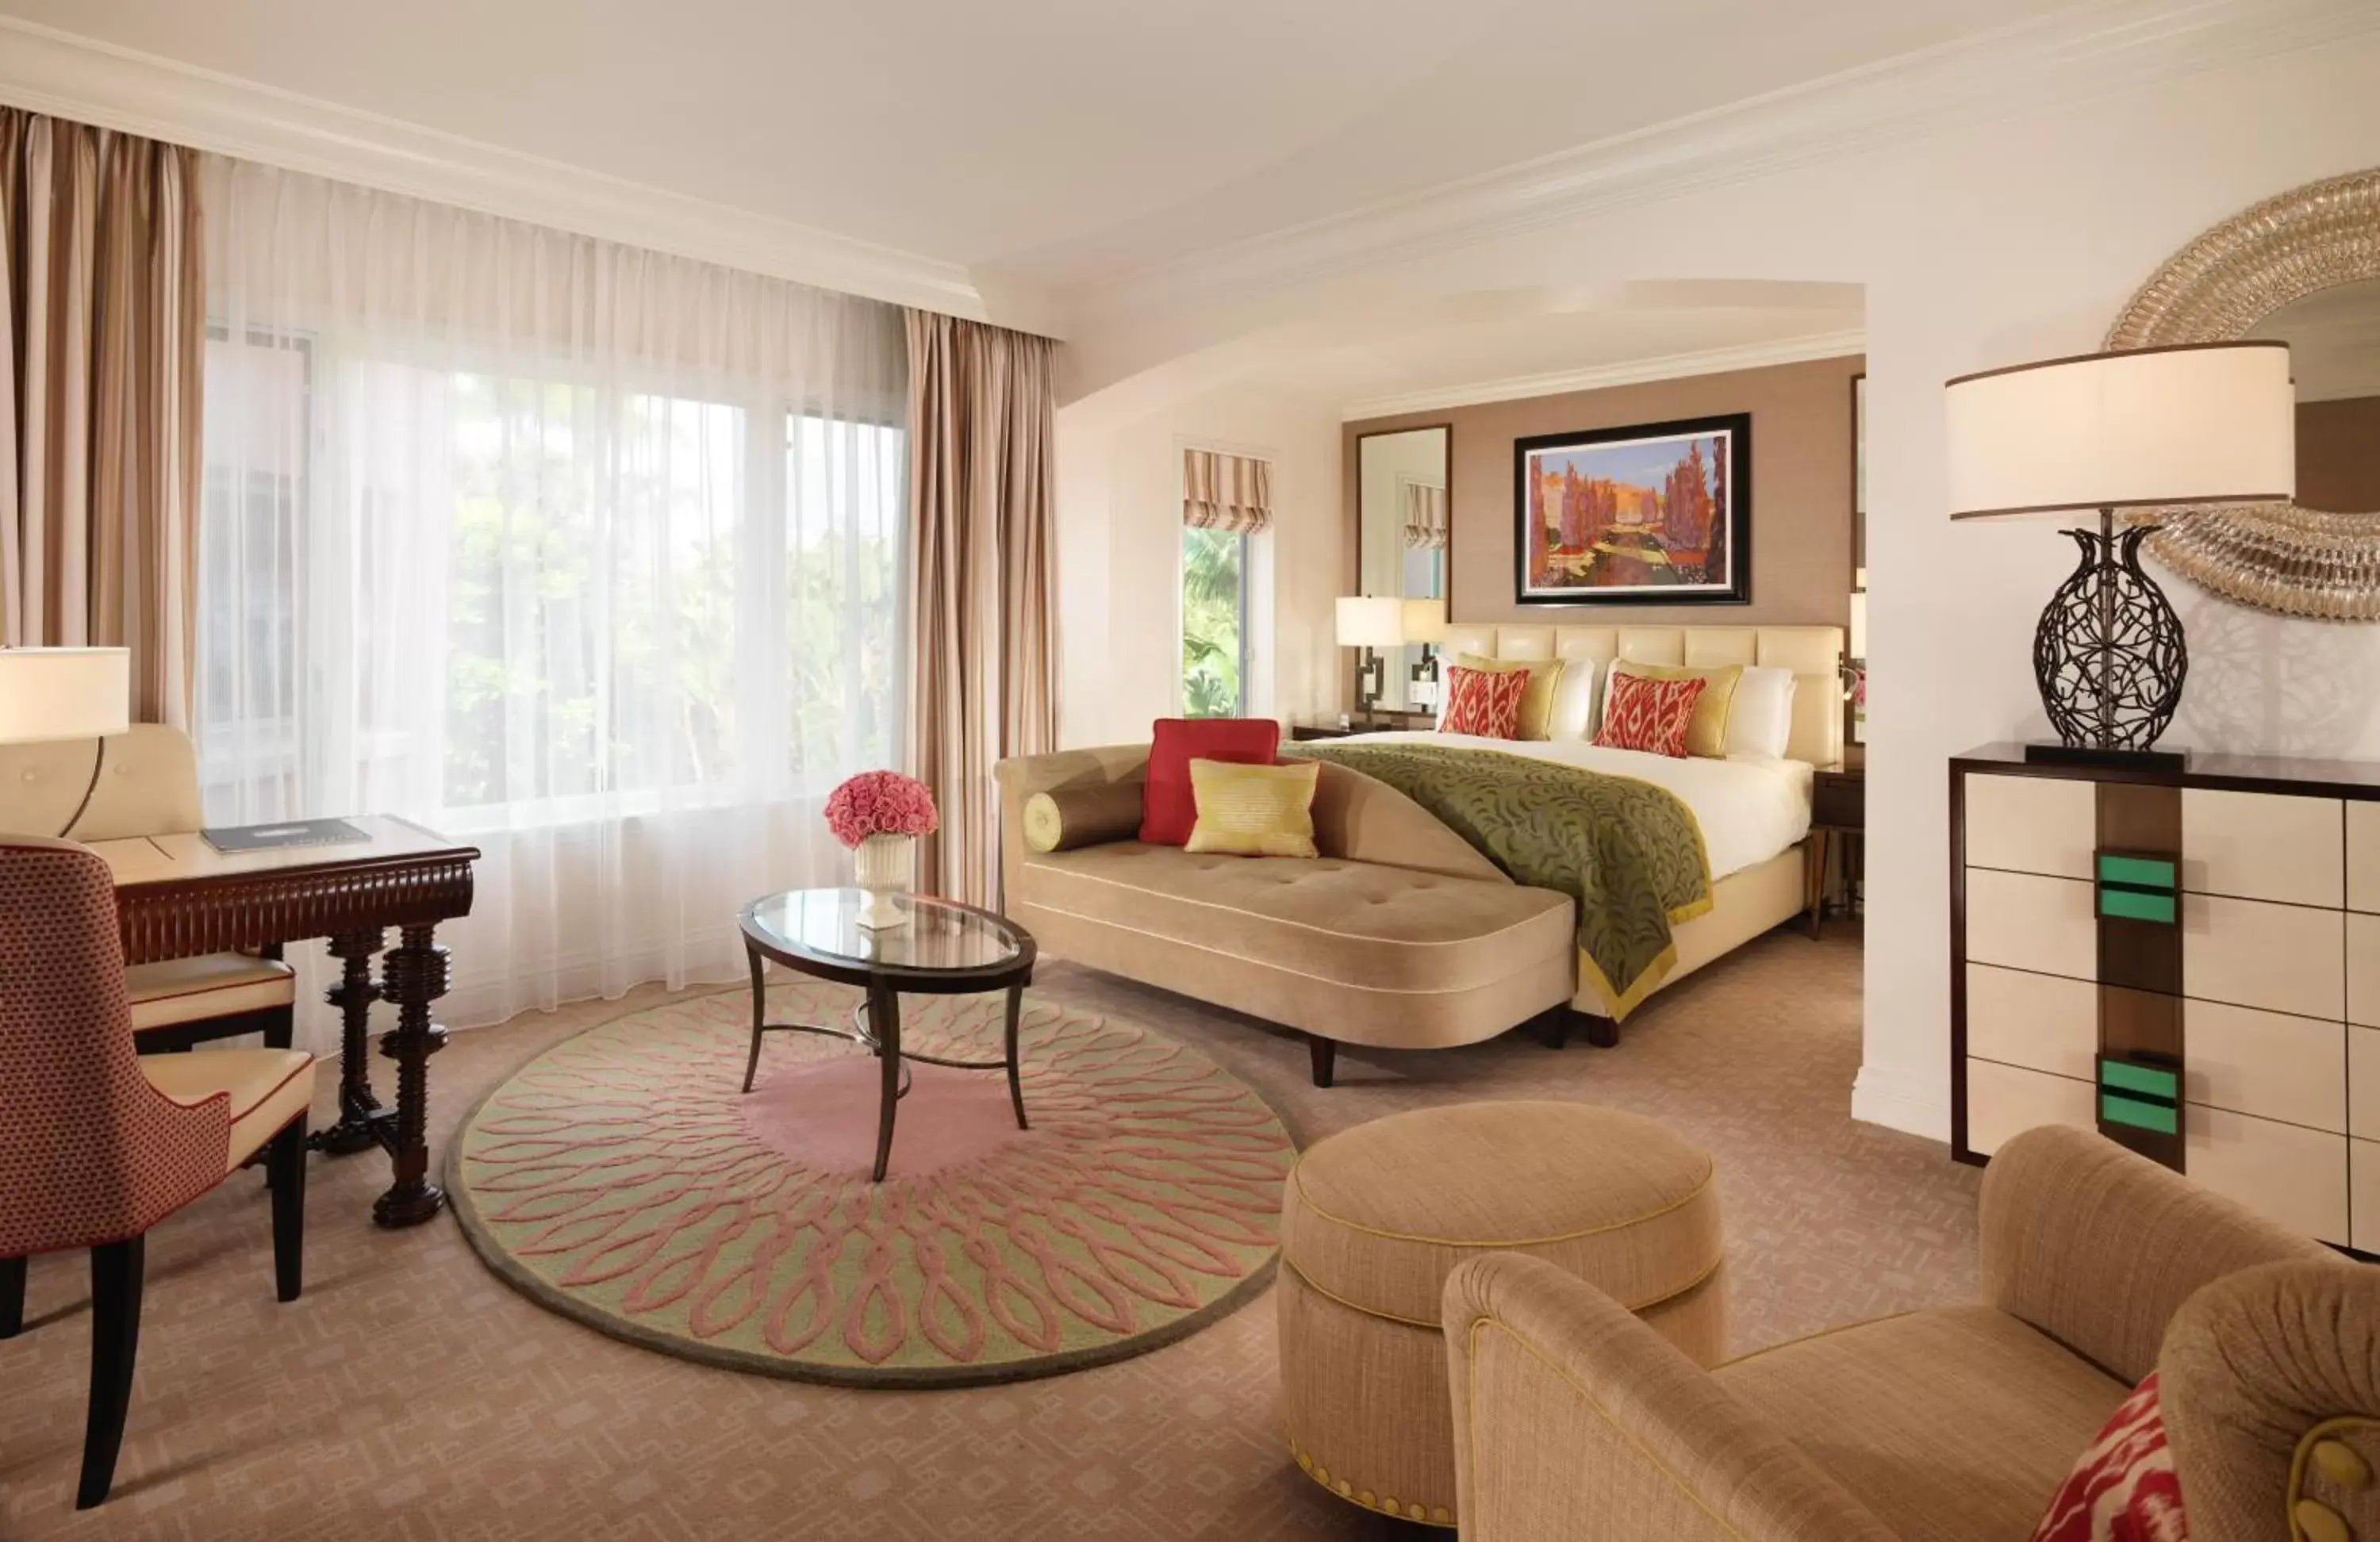 Deluxe King Room in The Beverly Hills Hotel - Dorchester Collection